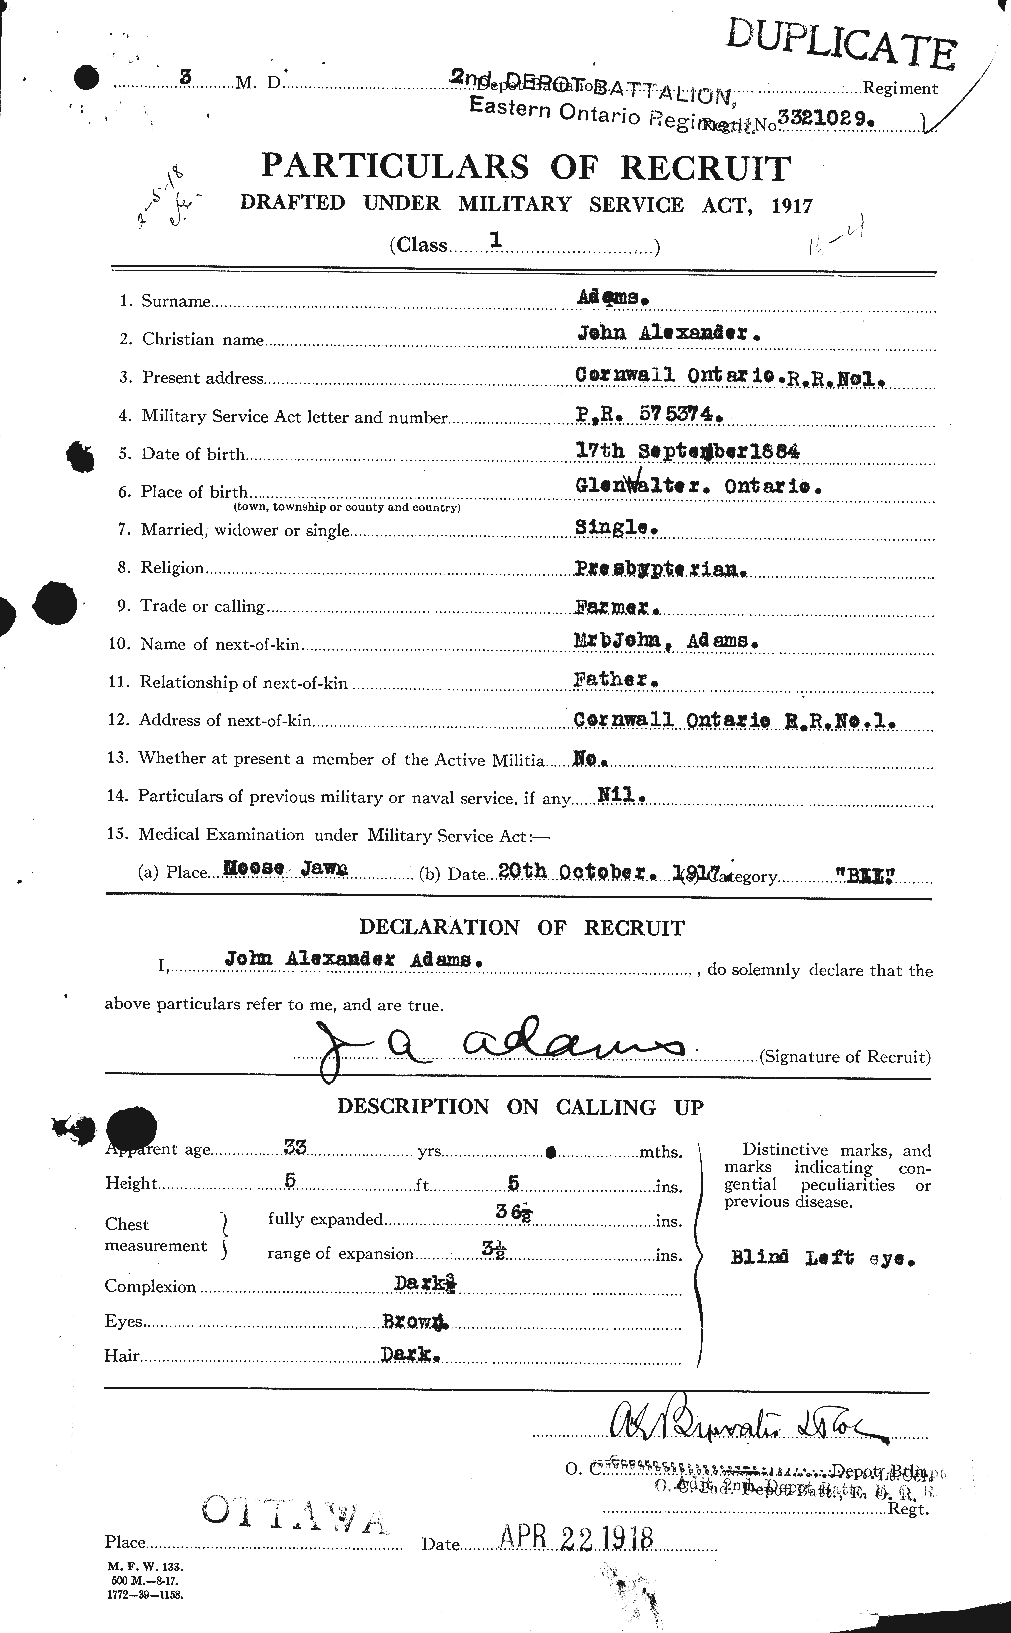 Personnel Records of the First World War - CEF 201894a